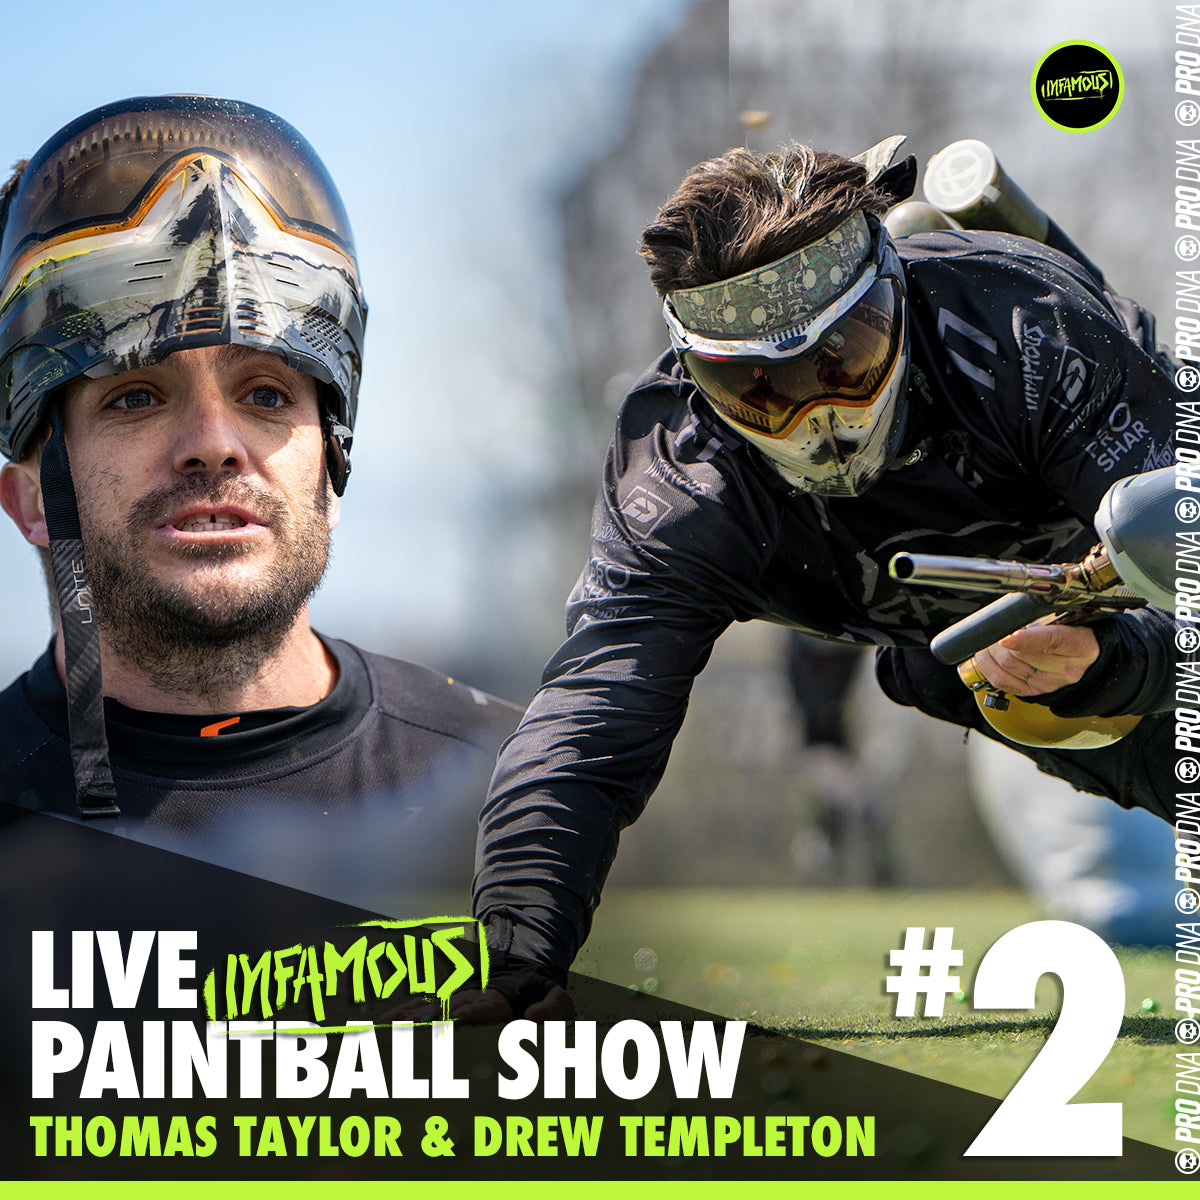 Infamous Live Paintball Show #2